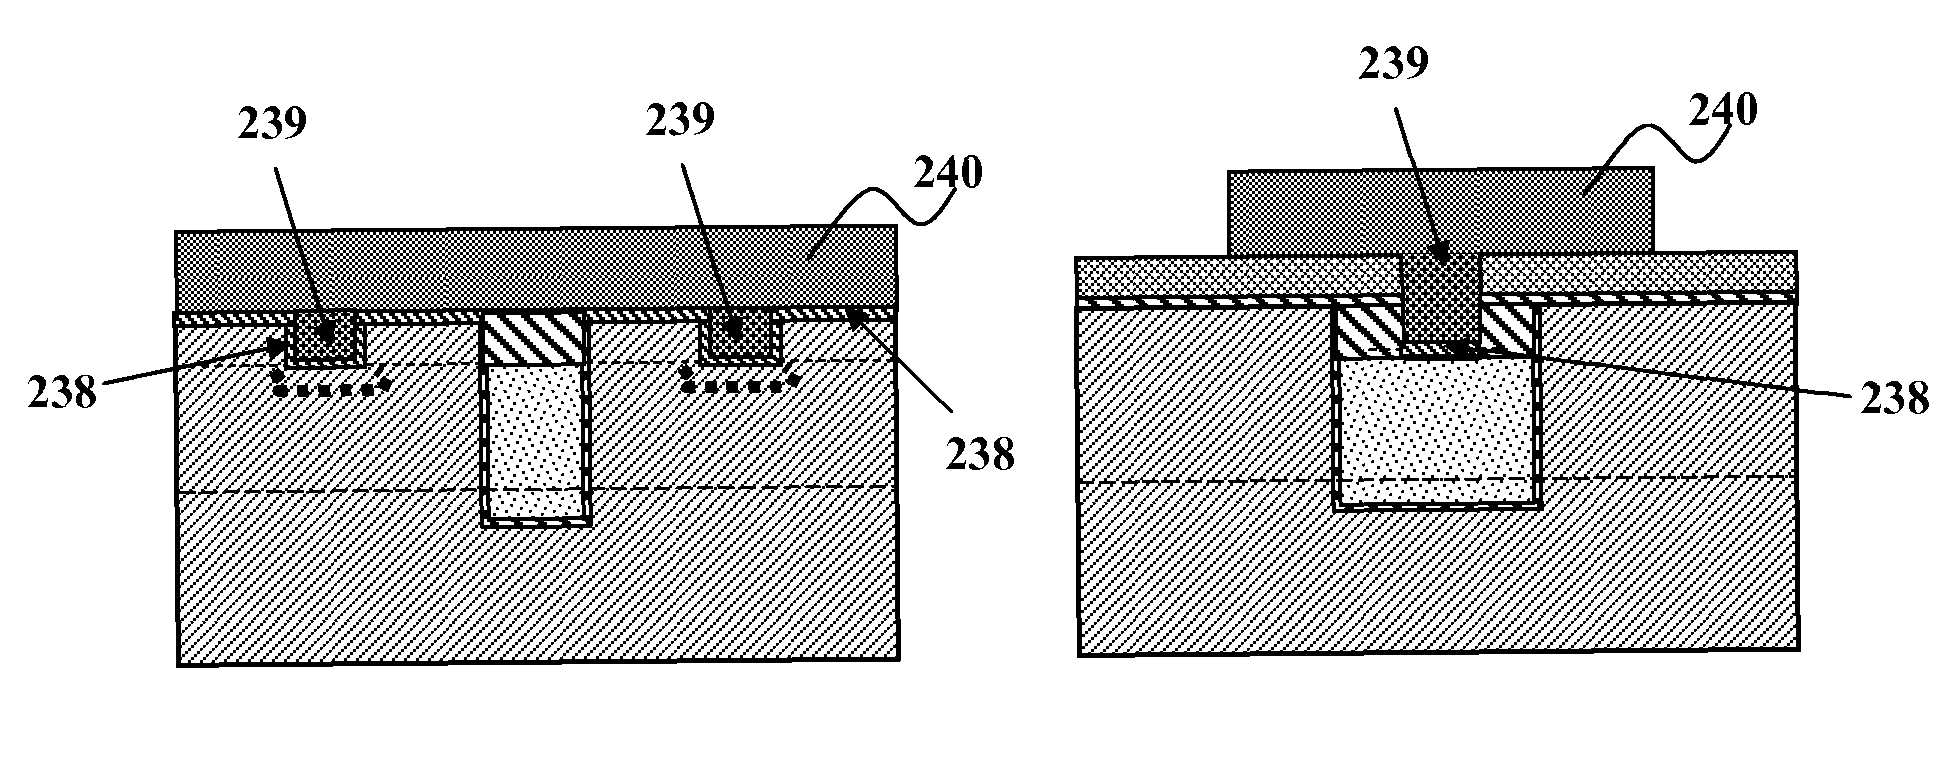 High density trench MOSFET with single mask pre-defined gate and contact trenches